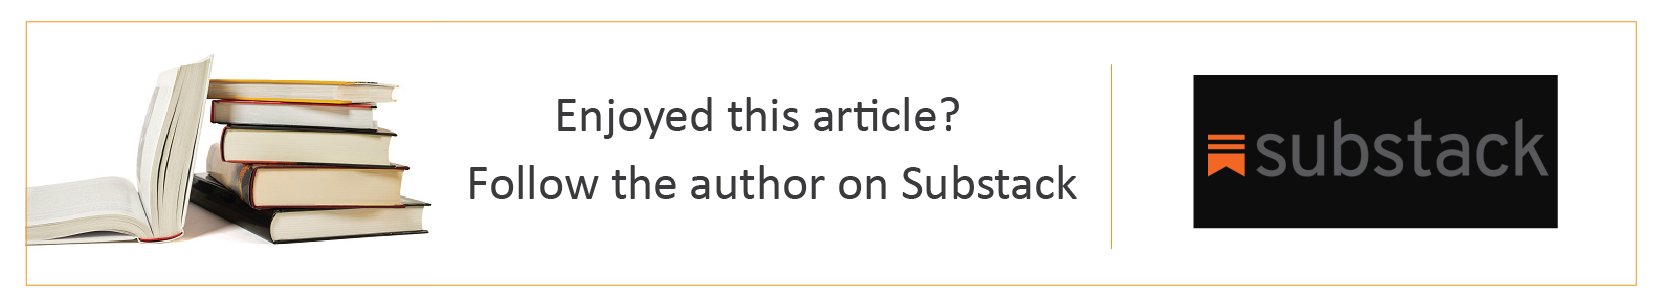 Follow this author on Substack